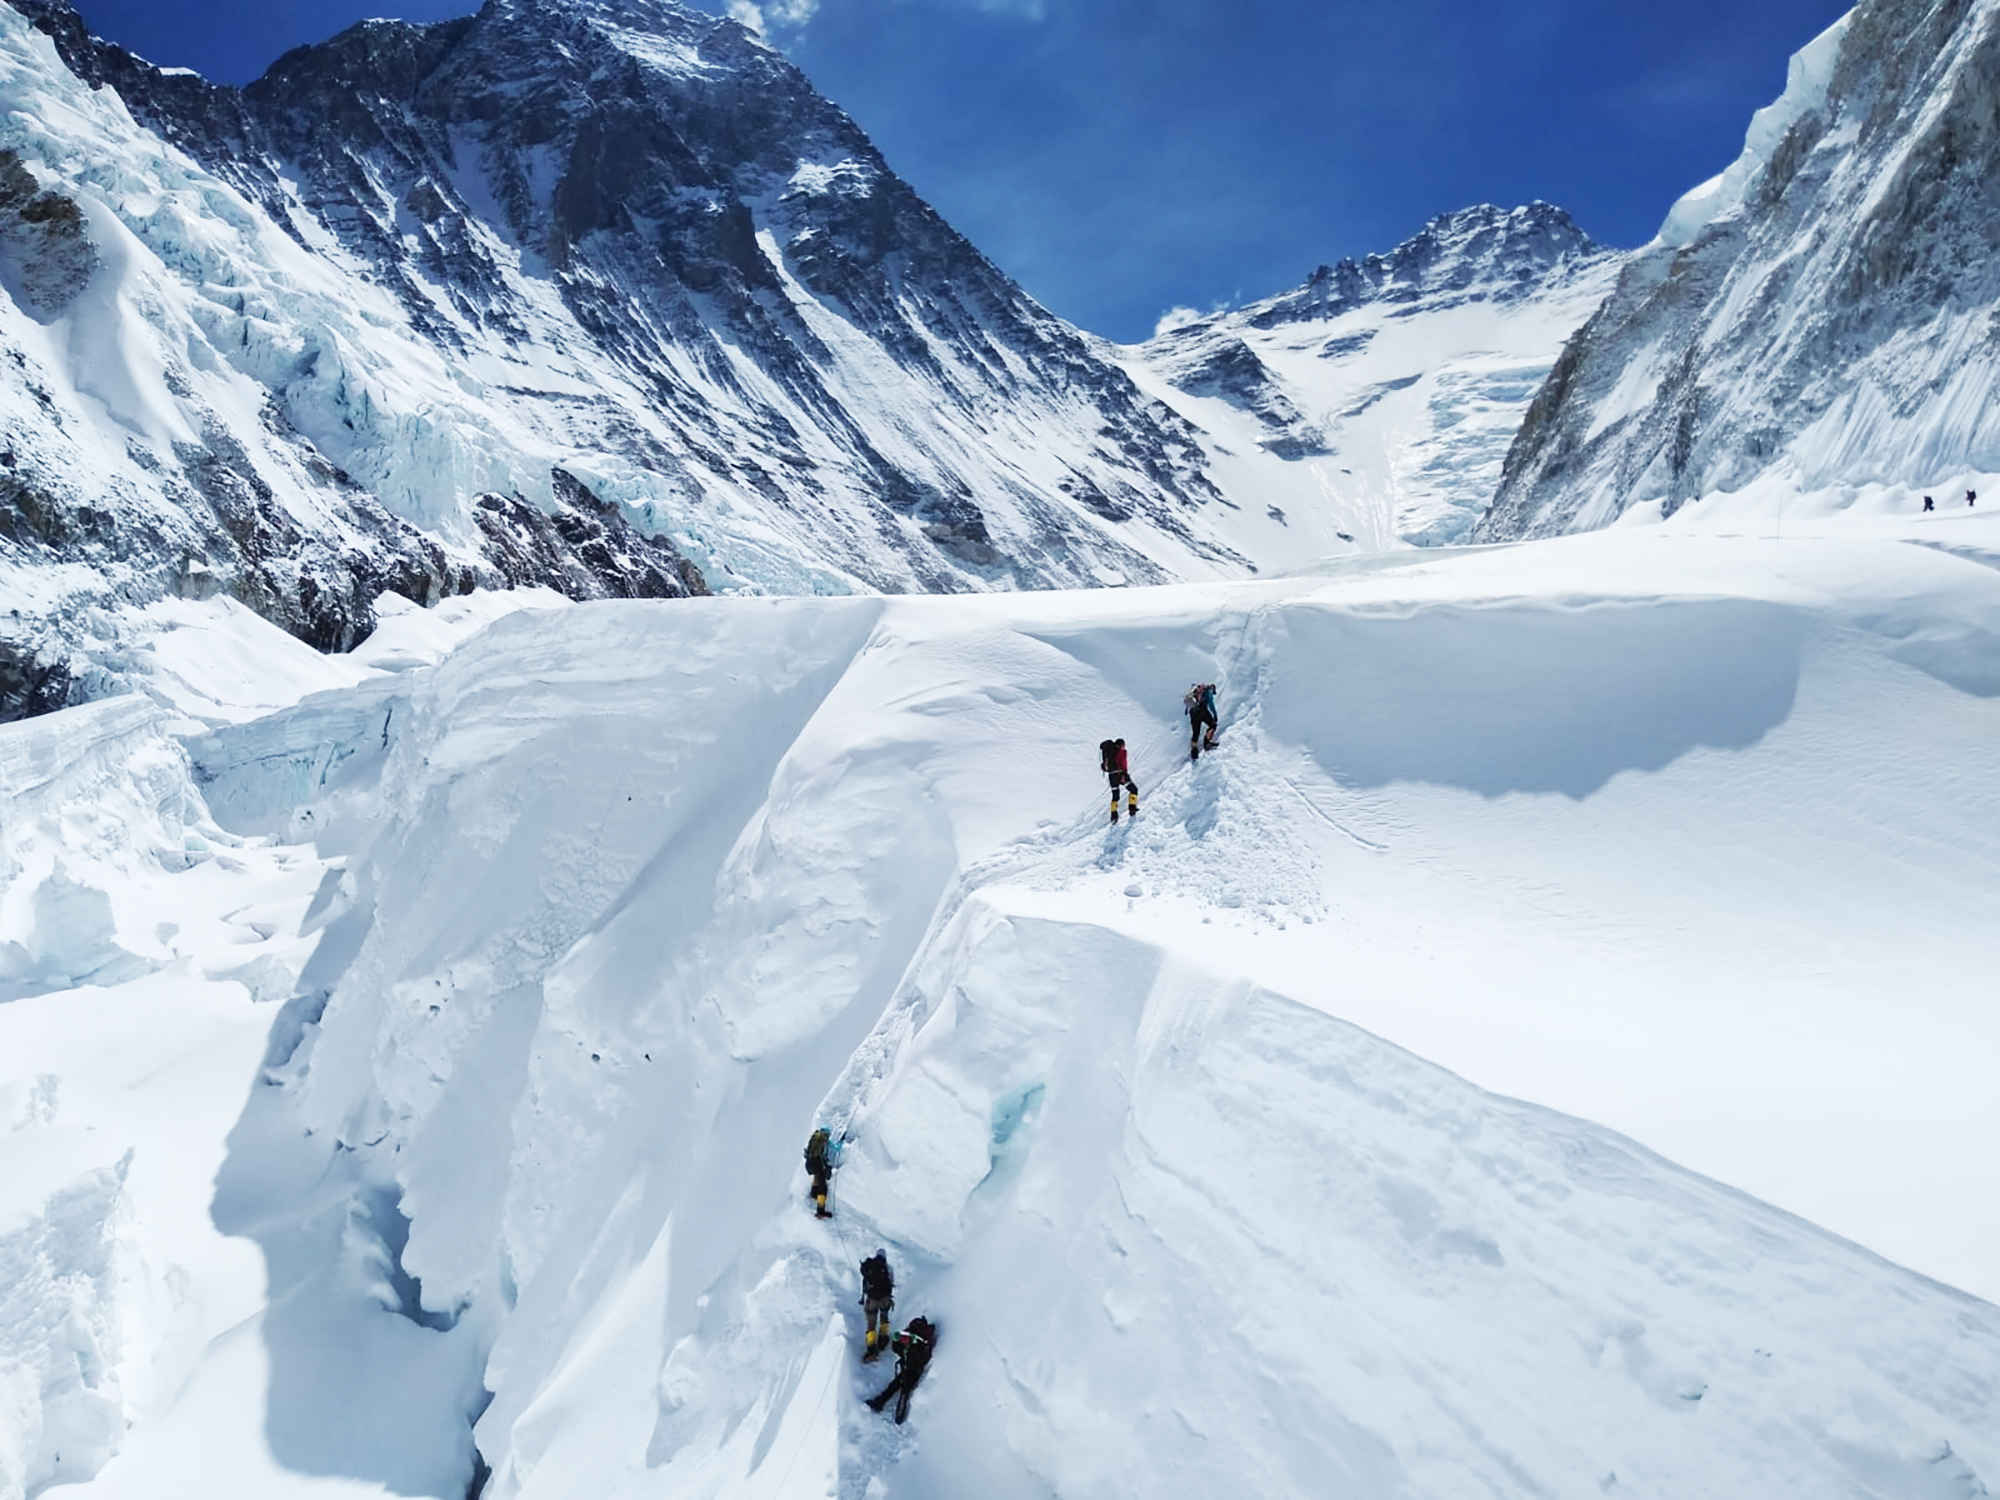 Climbers make their way up the Khumbu Icefall on their wall on our way to the Western Cwm.